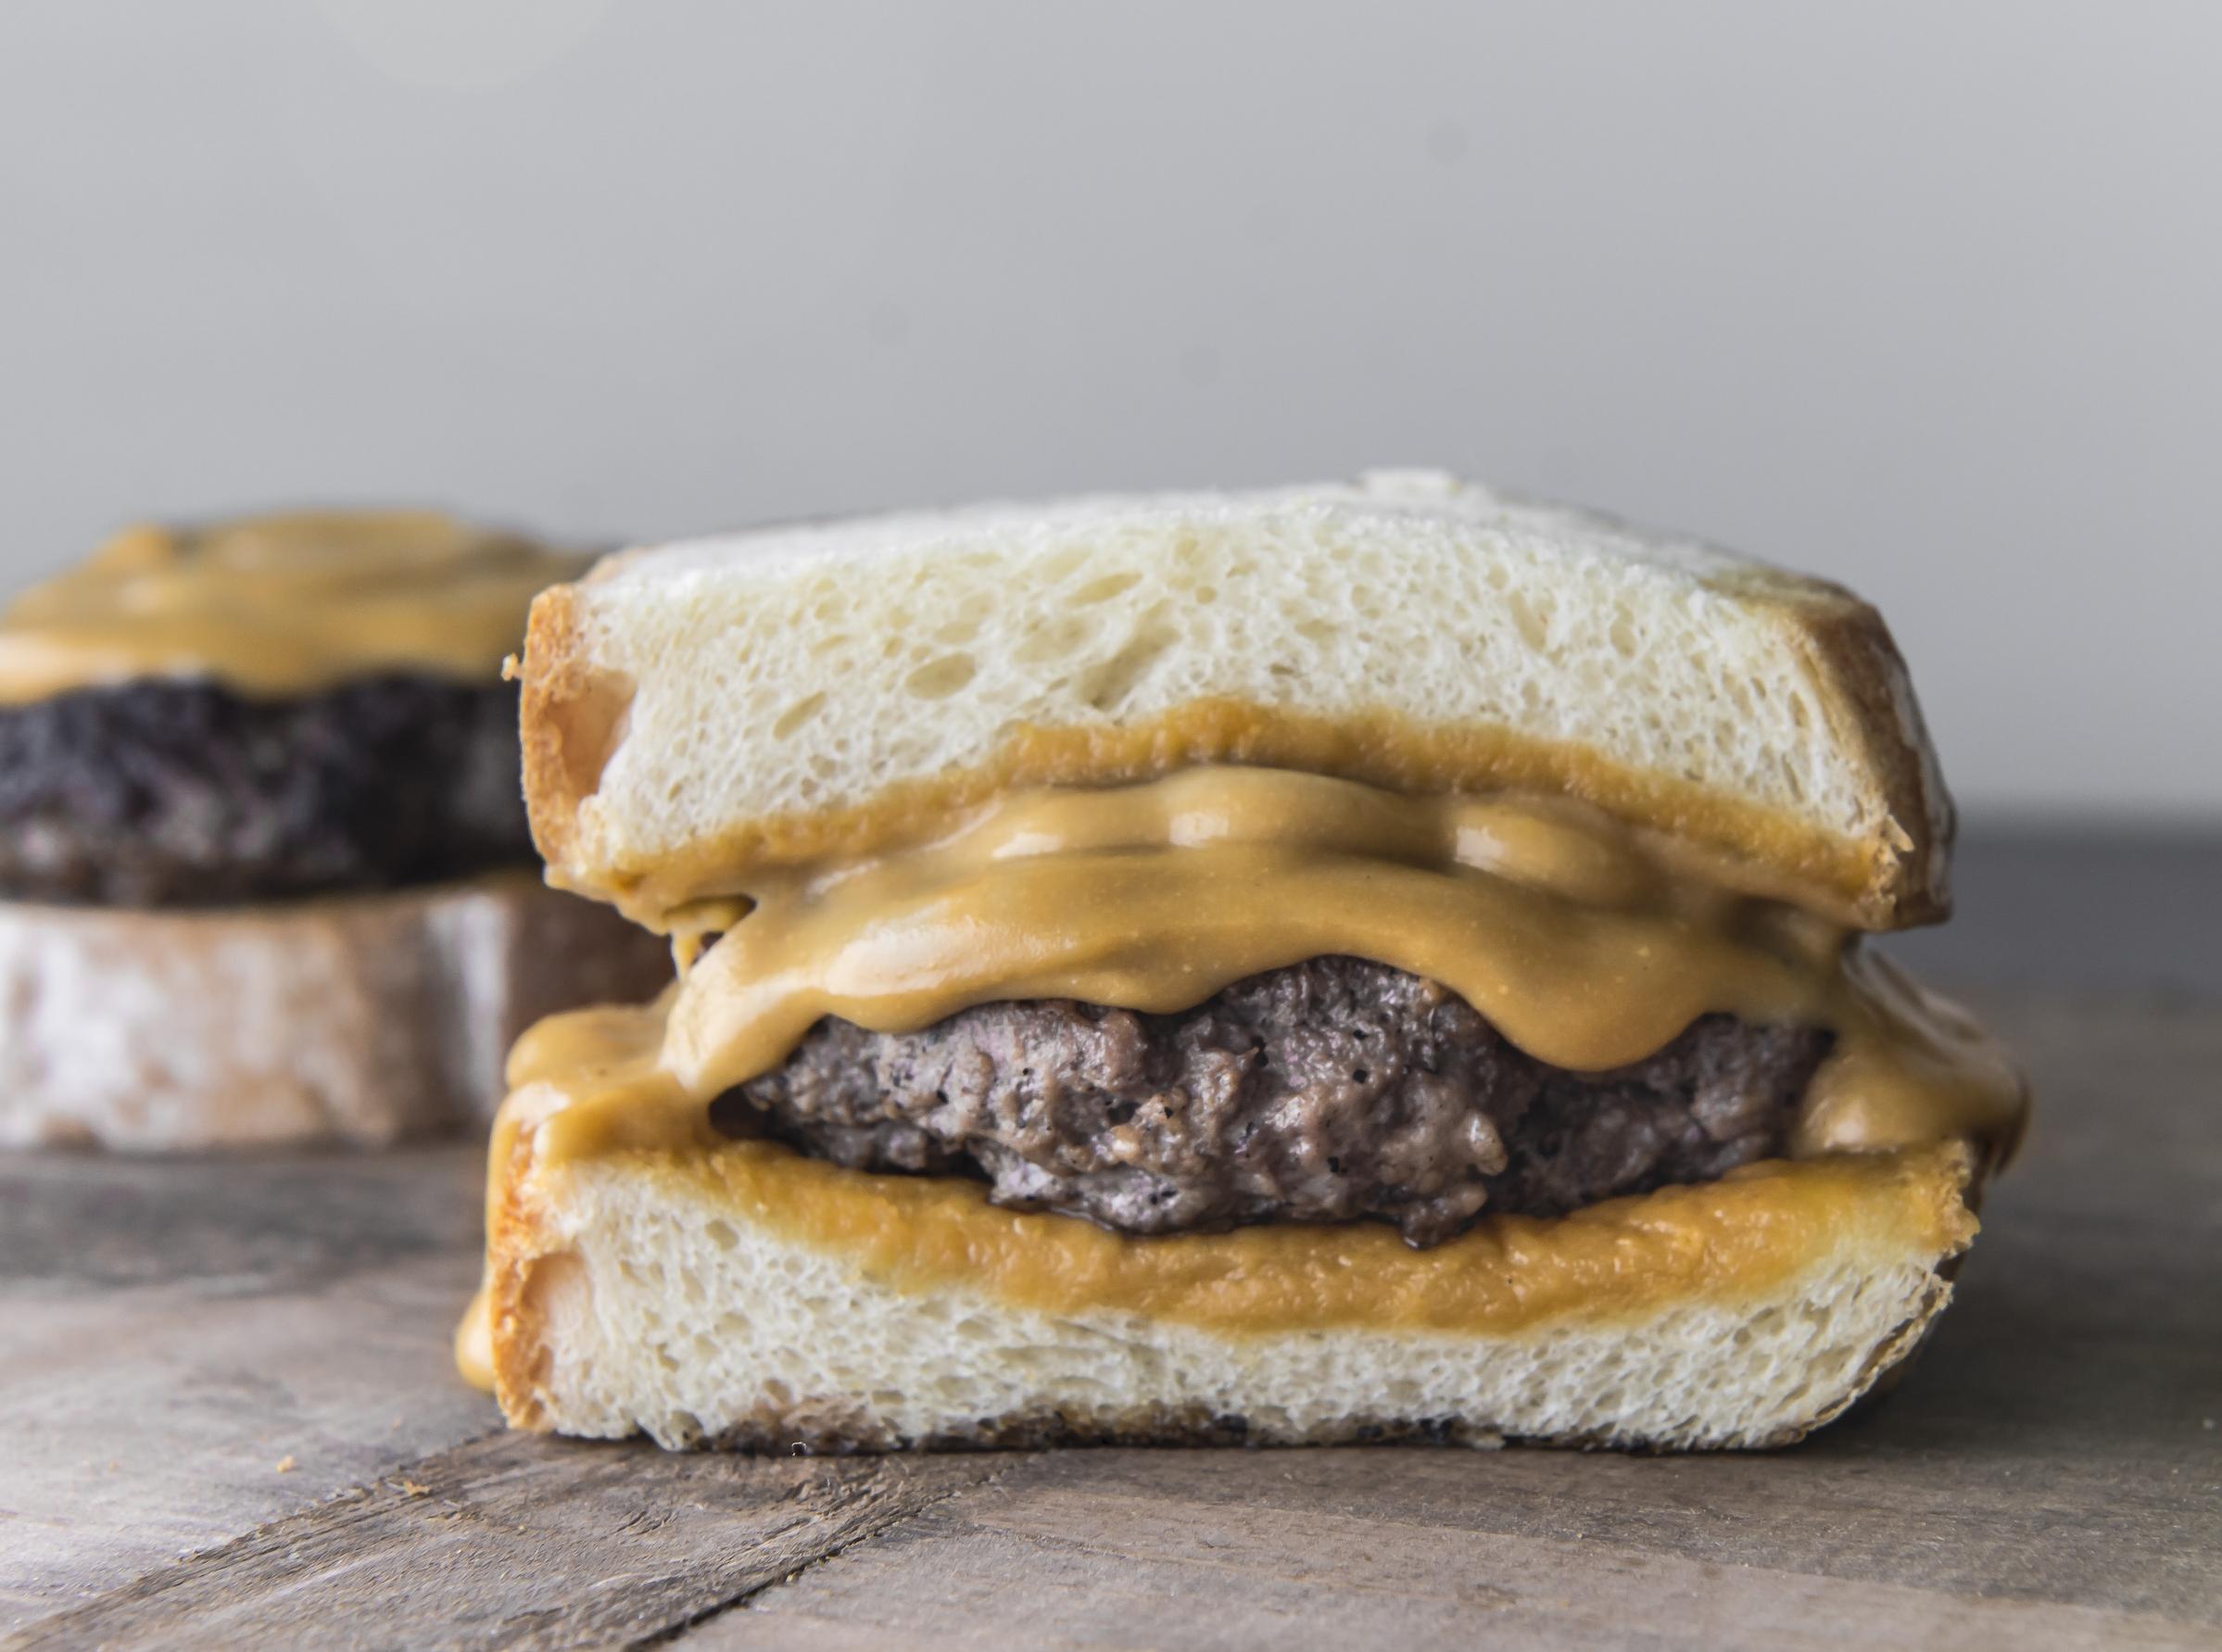  Juicy beef patties, slathered in melted Welsh rarebit, and served on a soft bun.